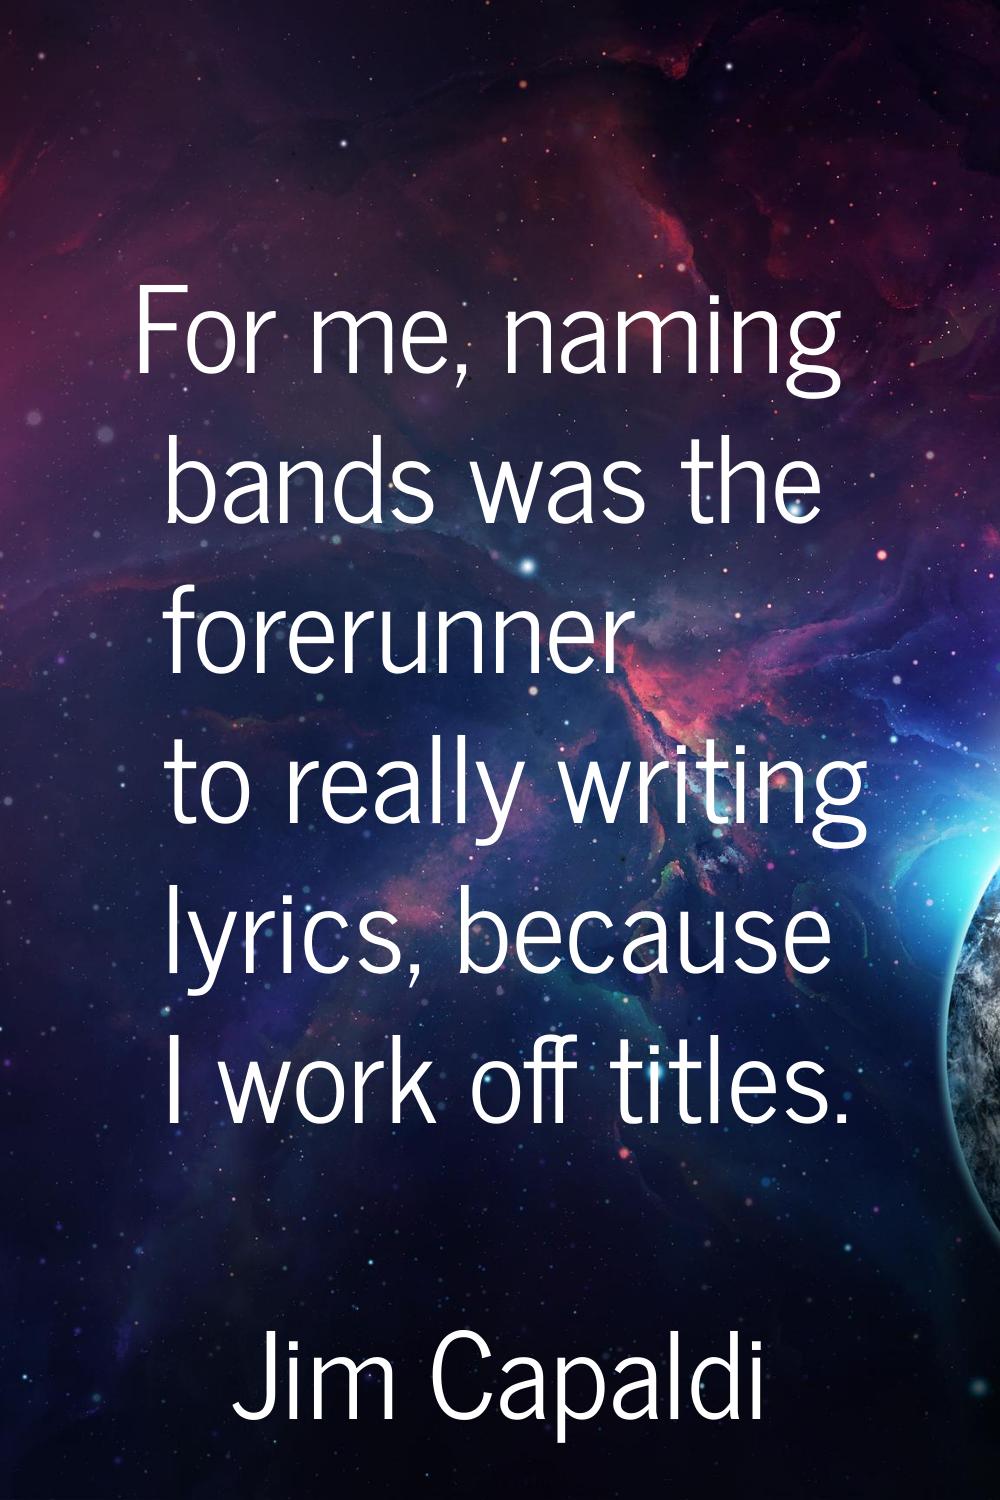 For me, naming bands was the forerunner to really writing lyrics, because I work off titles.